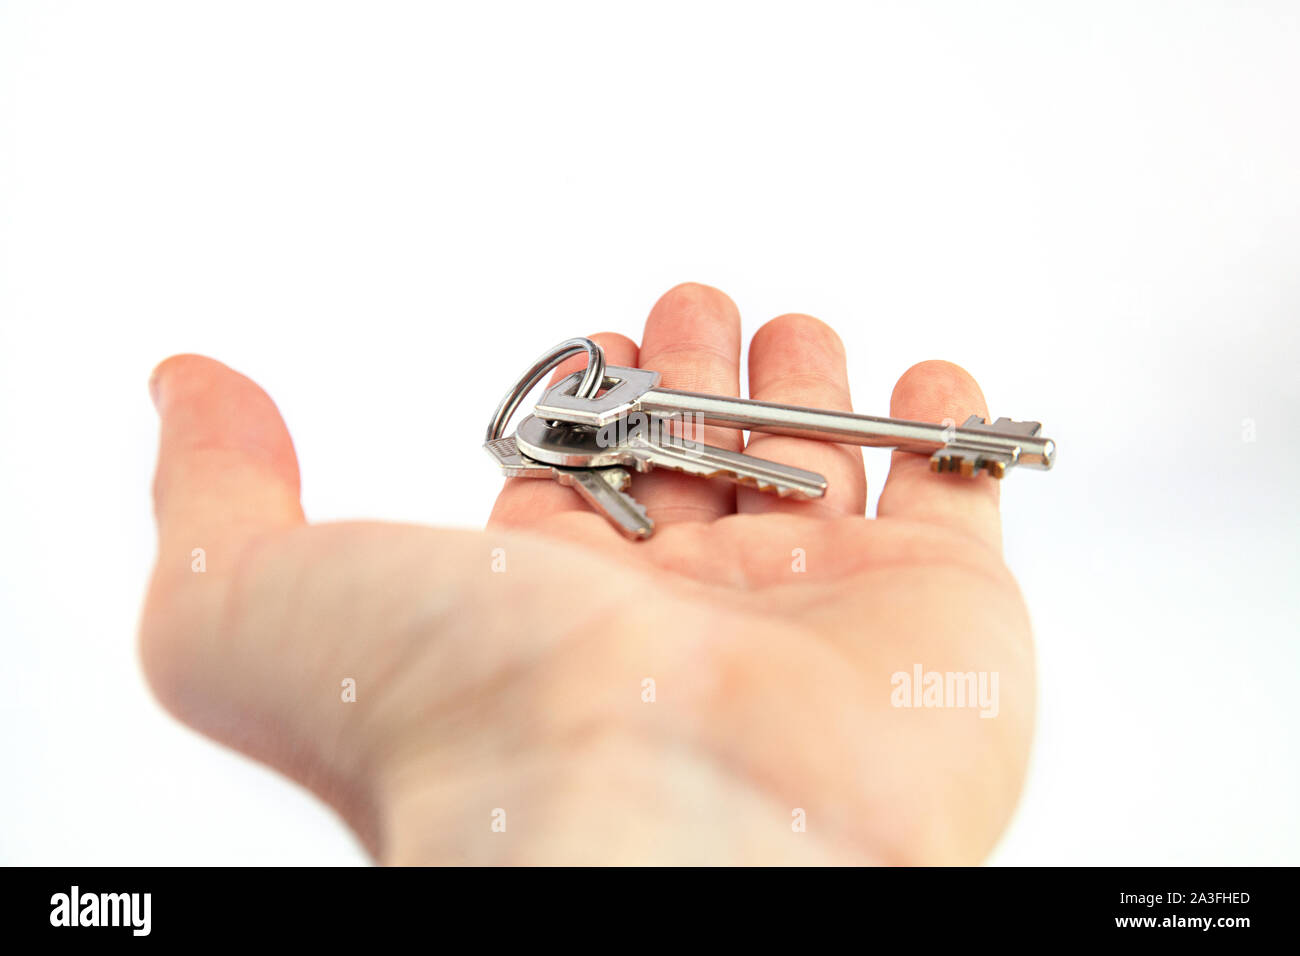 A hand with a bunch of keys. A hand delivers a bunch of keys on a white background. Stock Photo